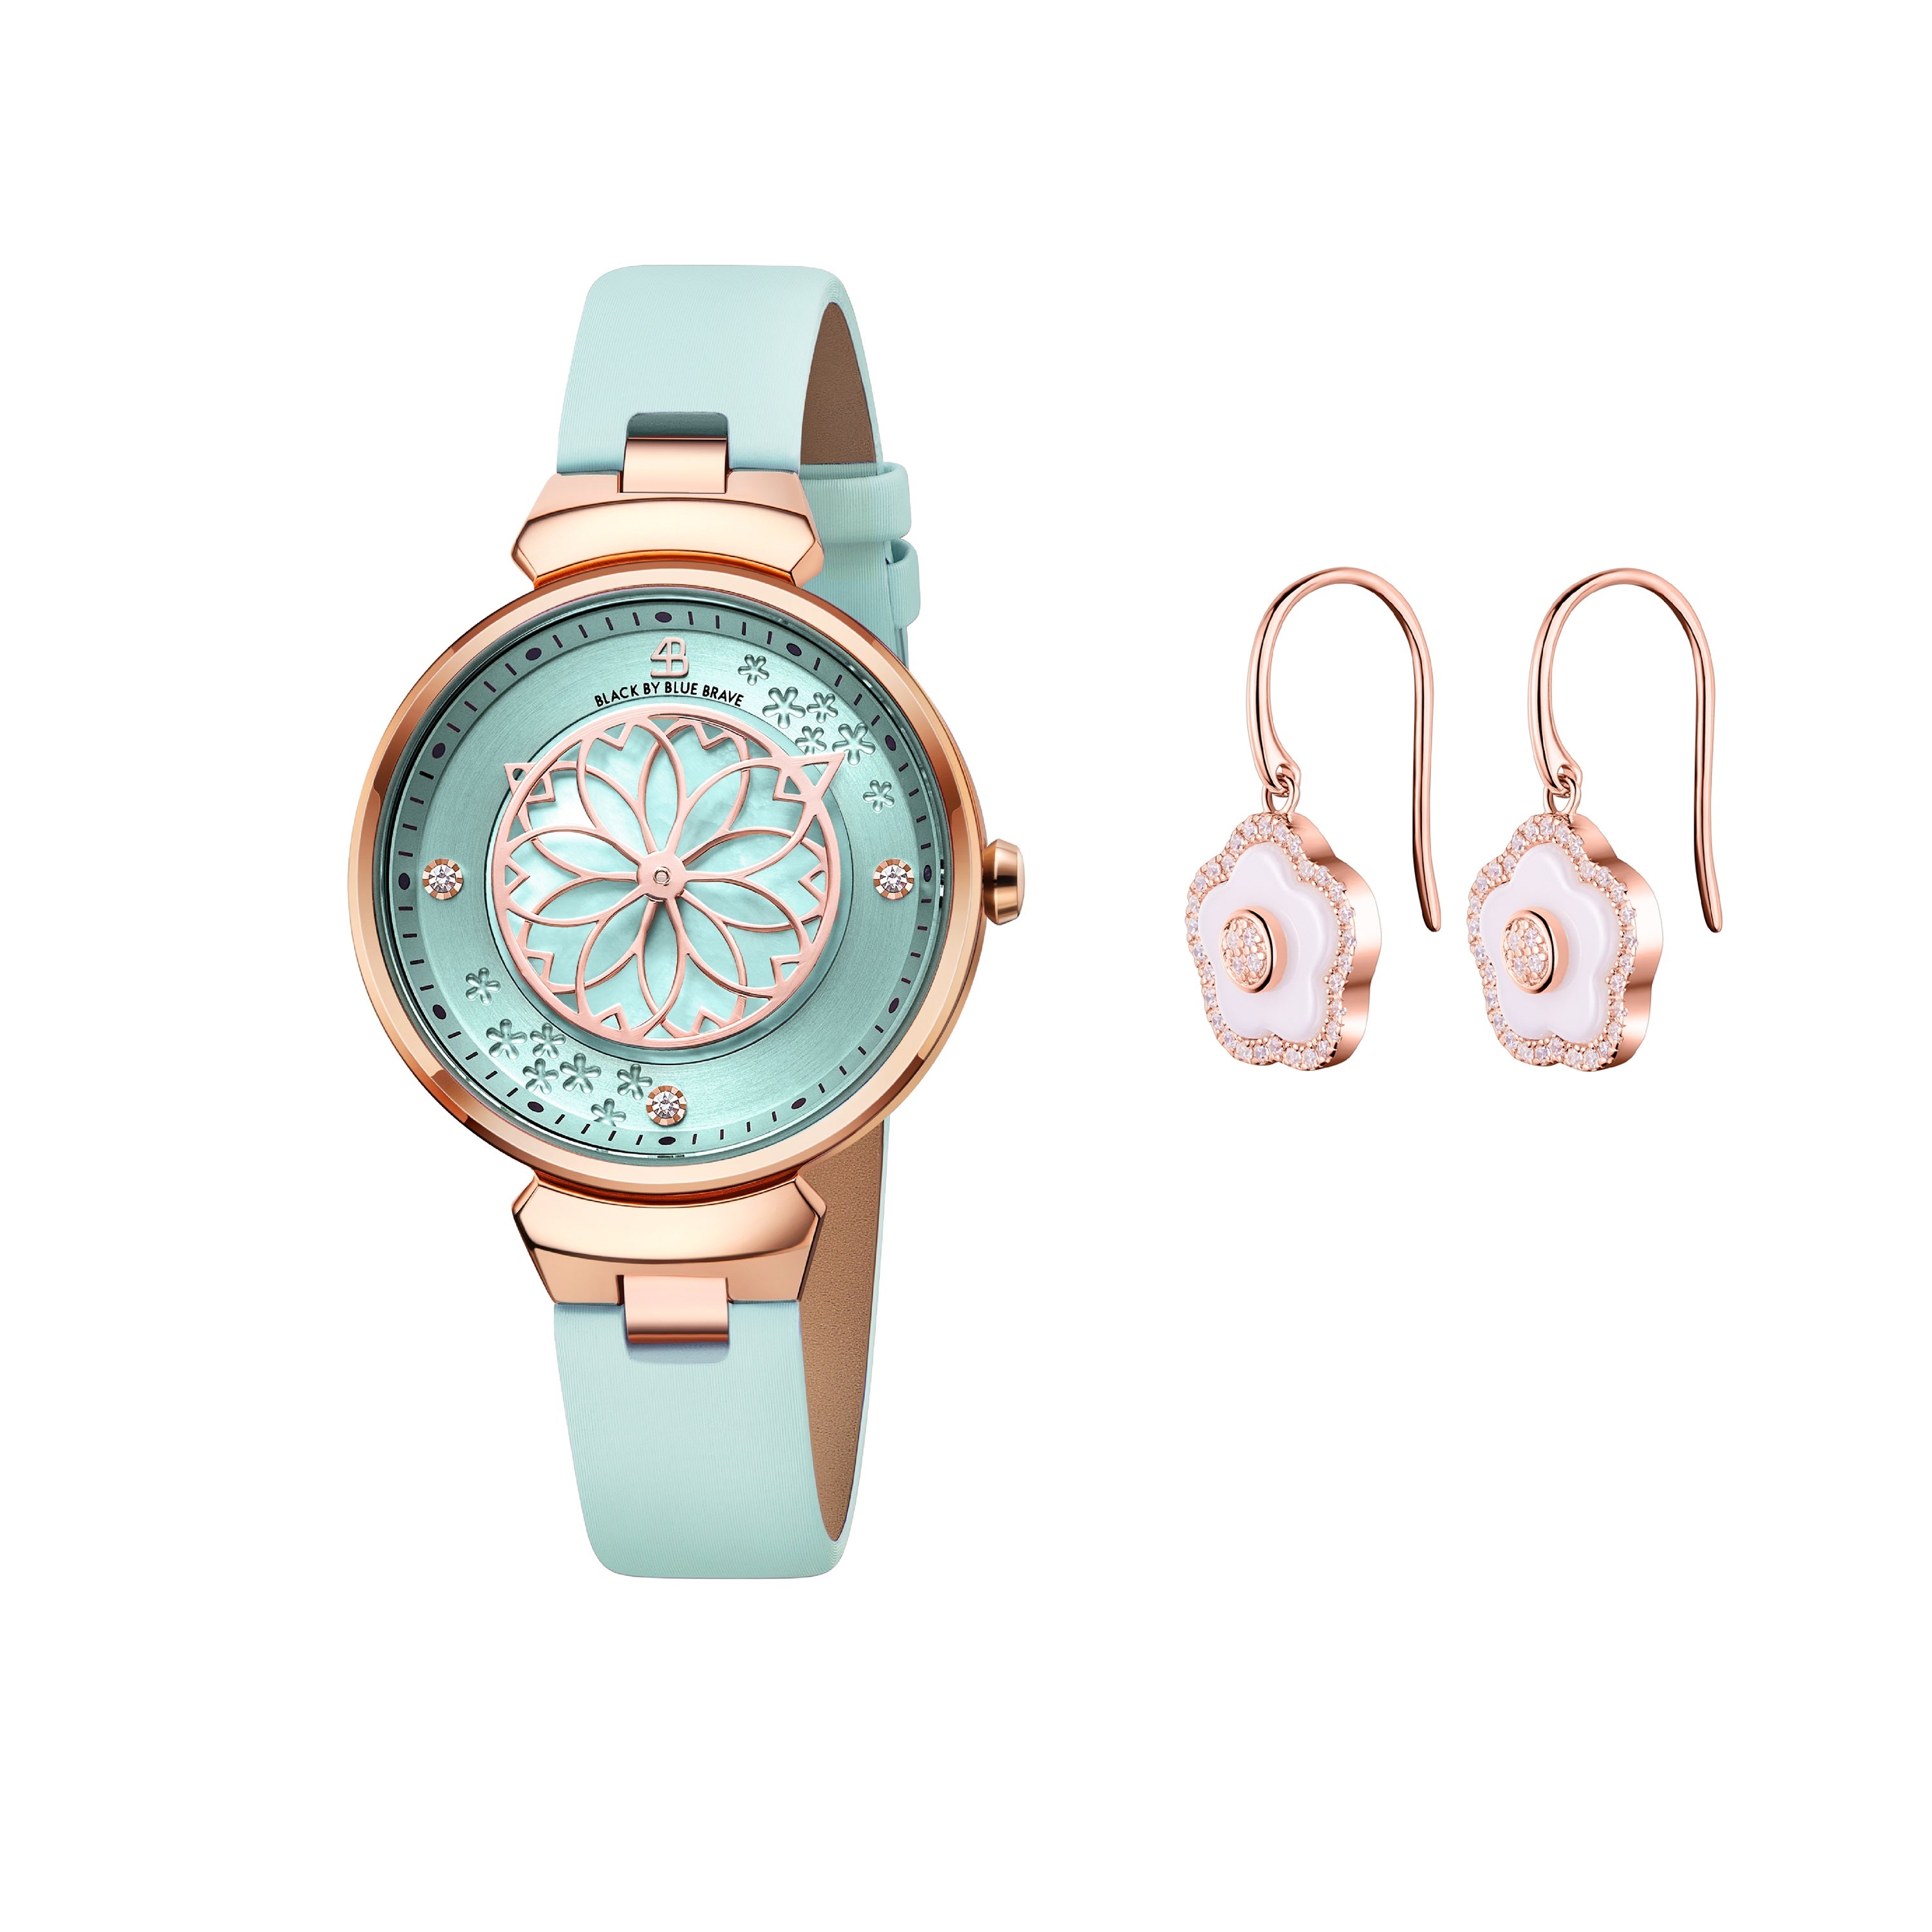 Blue Cherry Blossom Ceramic Watch With Flower Ceramic Earrings